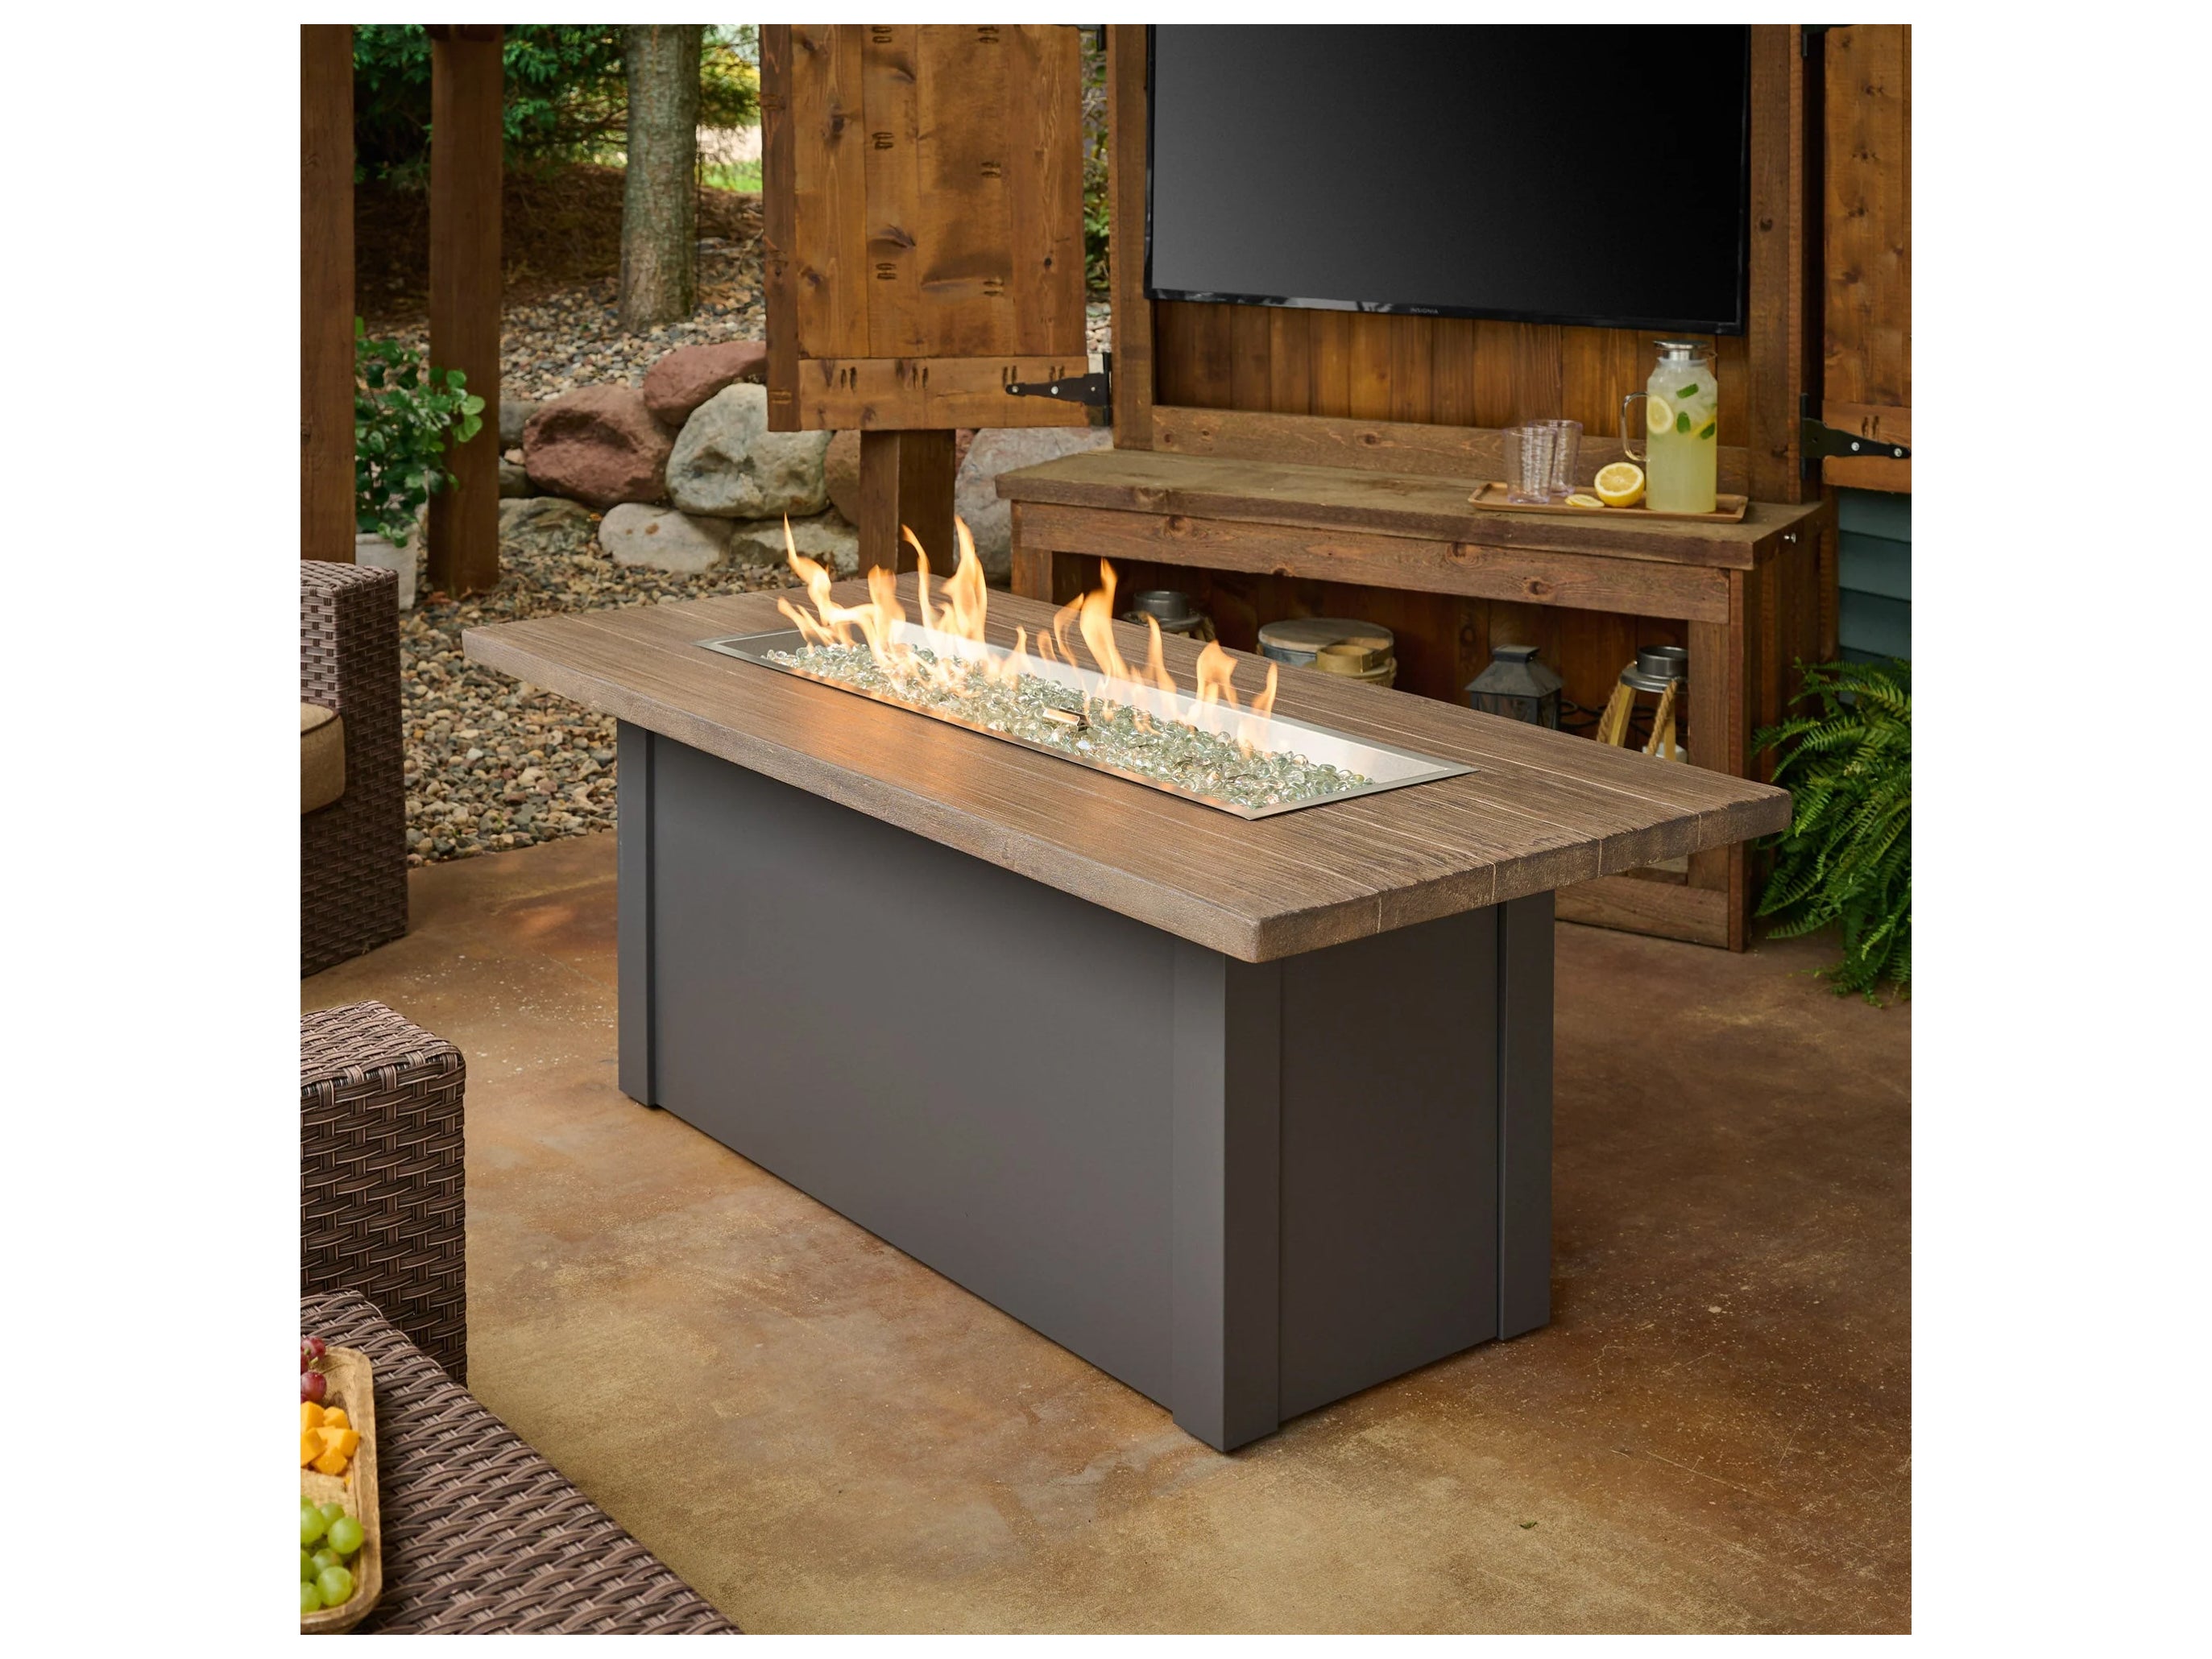 Outdoor Greatroom - 62’‘W x 30’'D - Havenwood Rectangular Driftwood Everblend Top Gas Fire Pit Table - 150 lbs